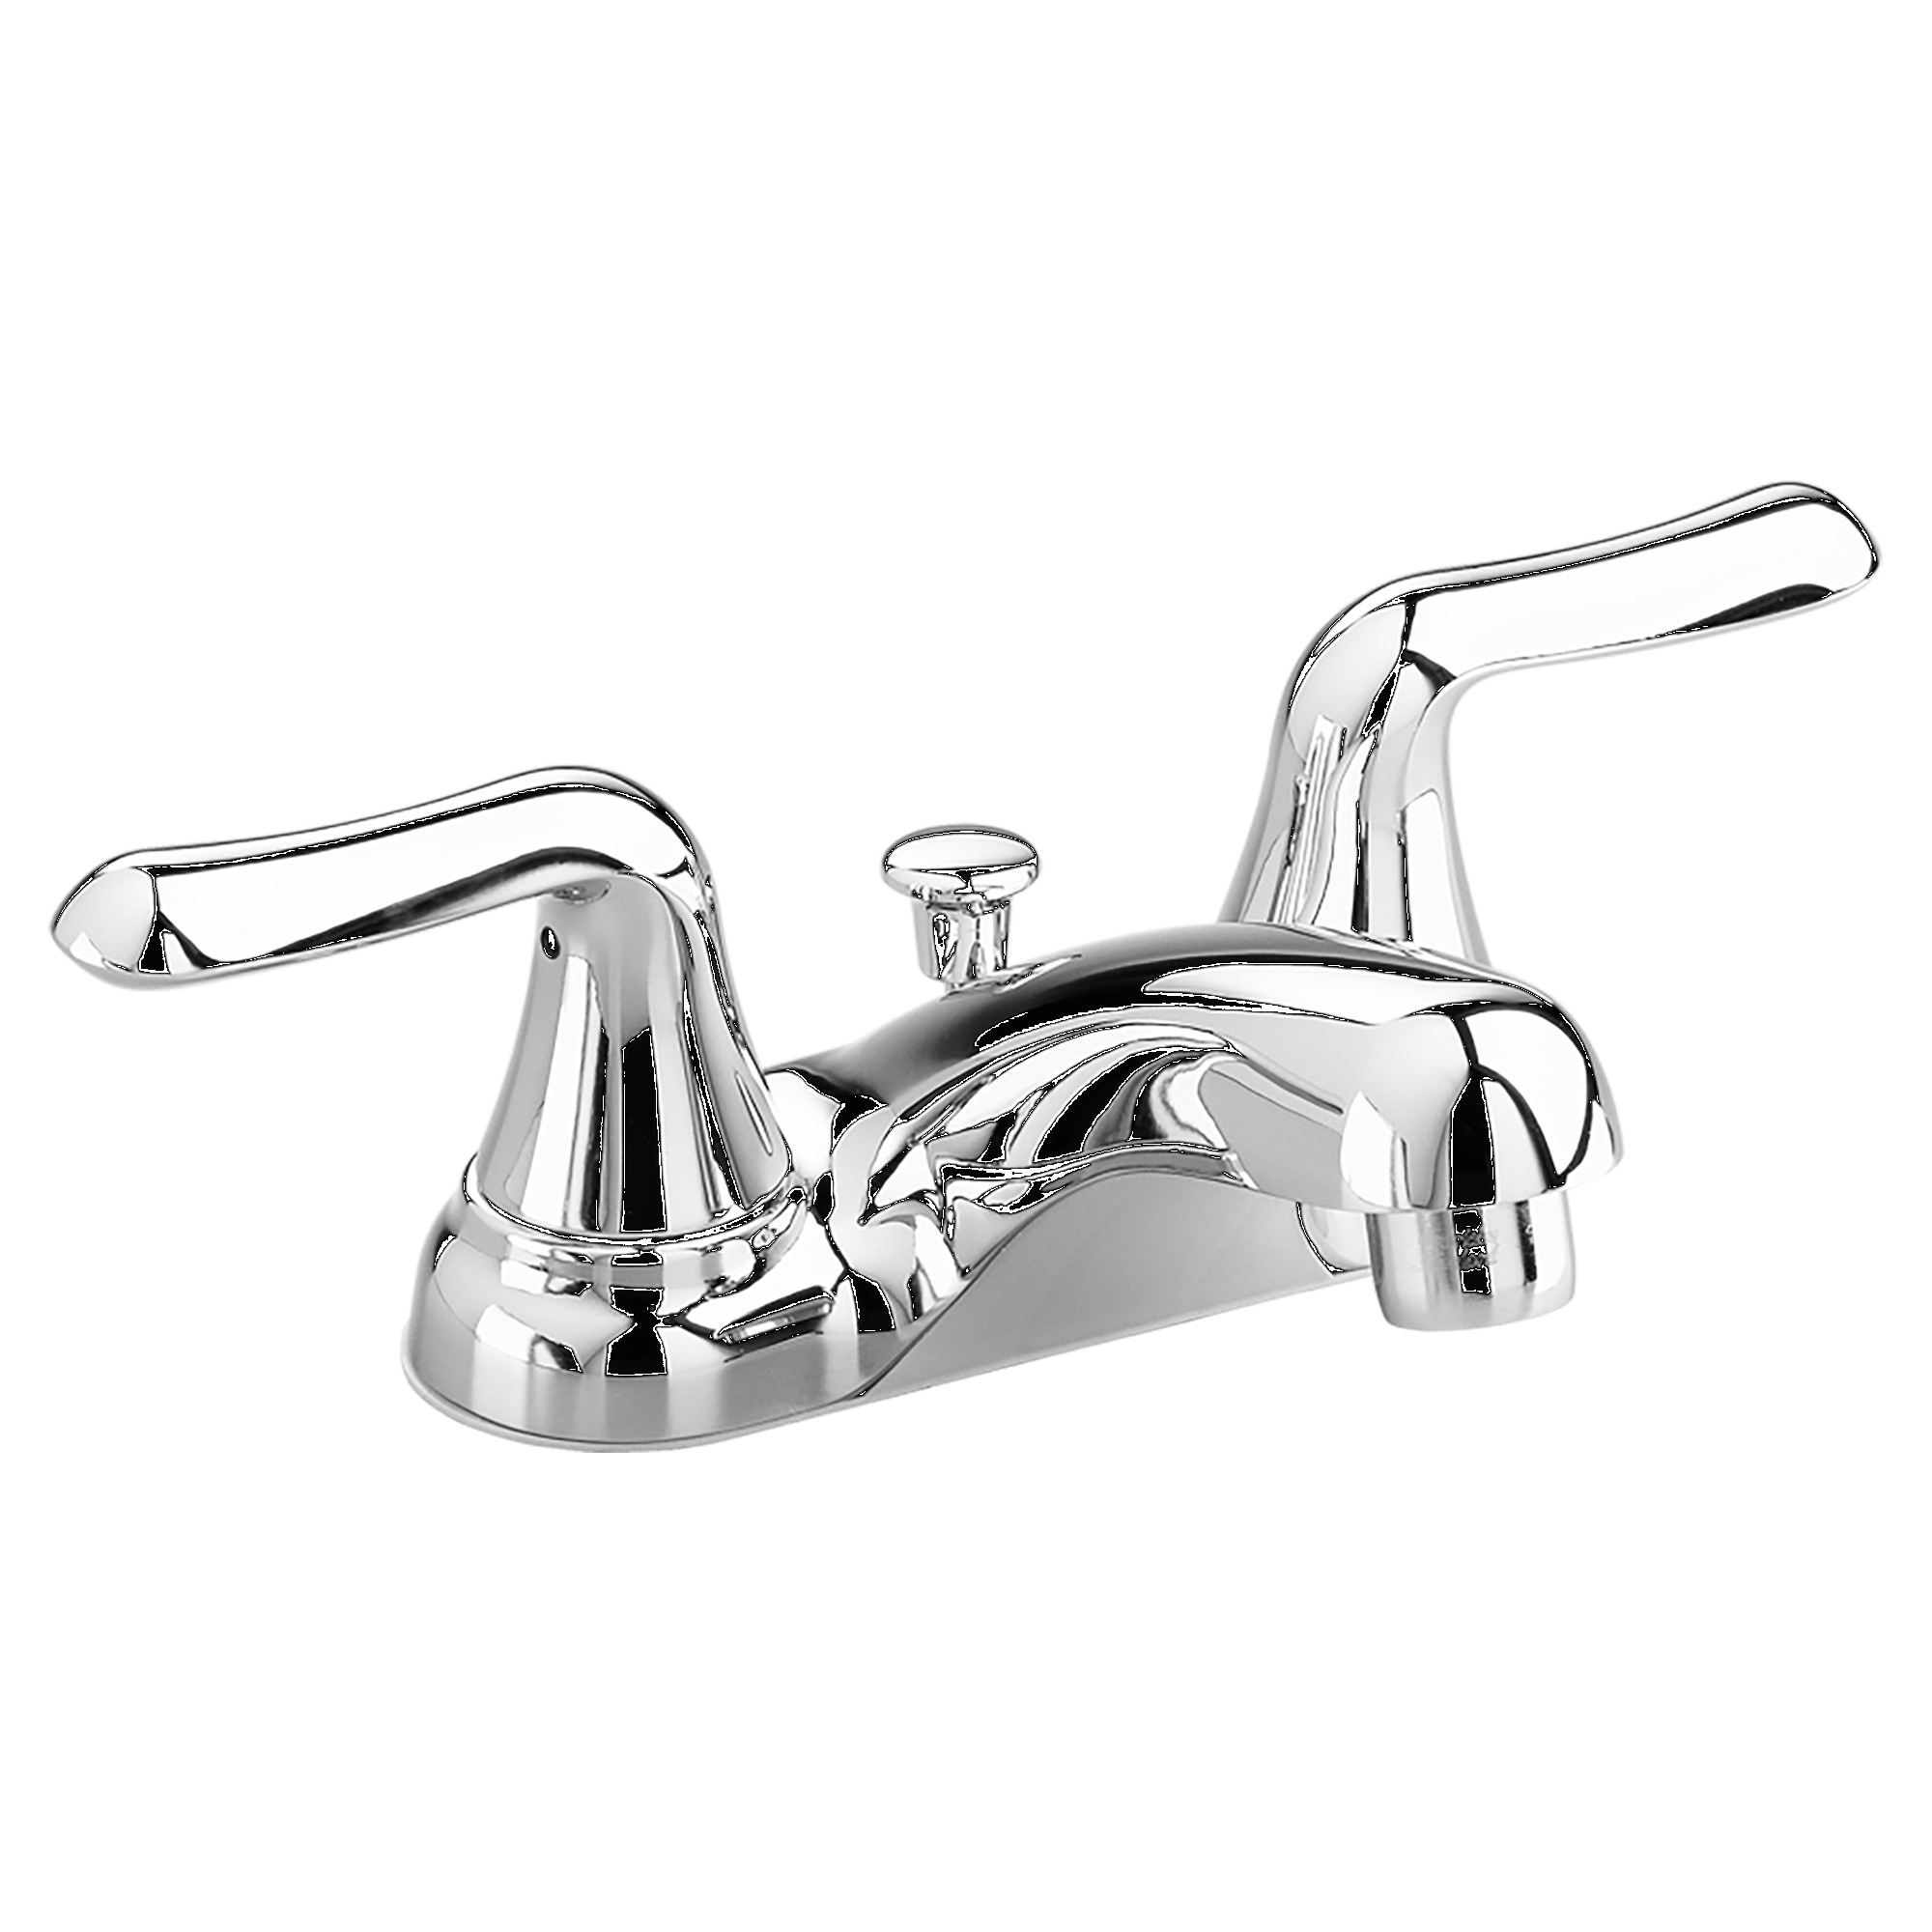 American Standard | 2275.509.002 | *AMERICAN STANDARD 2275.509 COLONY SOFT CENTERSET LAVATORY FAUCET WITH POP-UP DRAIN CP 002 CHROME 1.5GPM